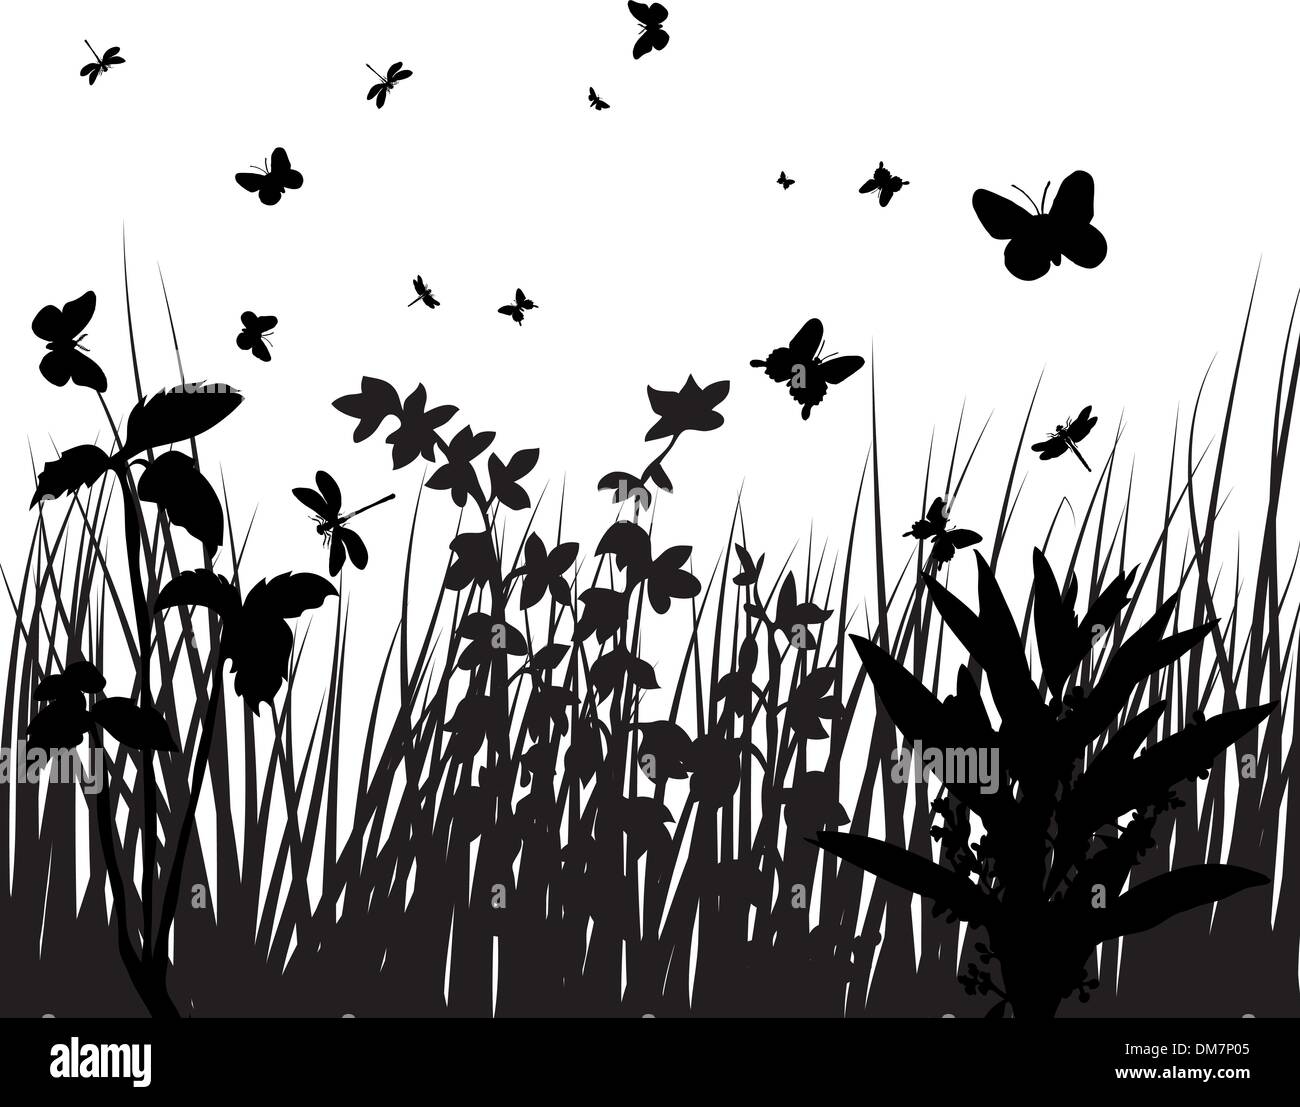 grass silhouettes Stock Vector